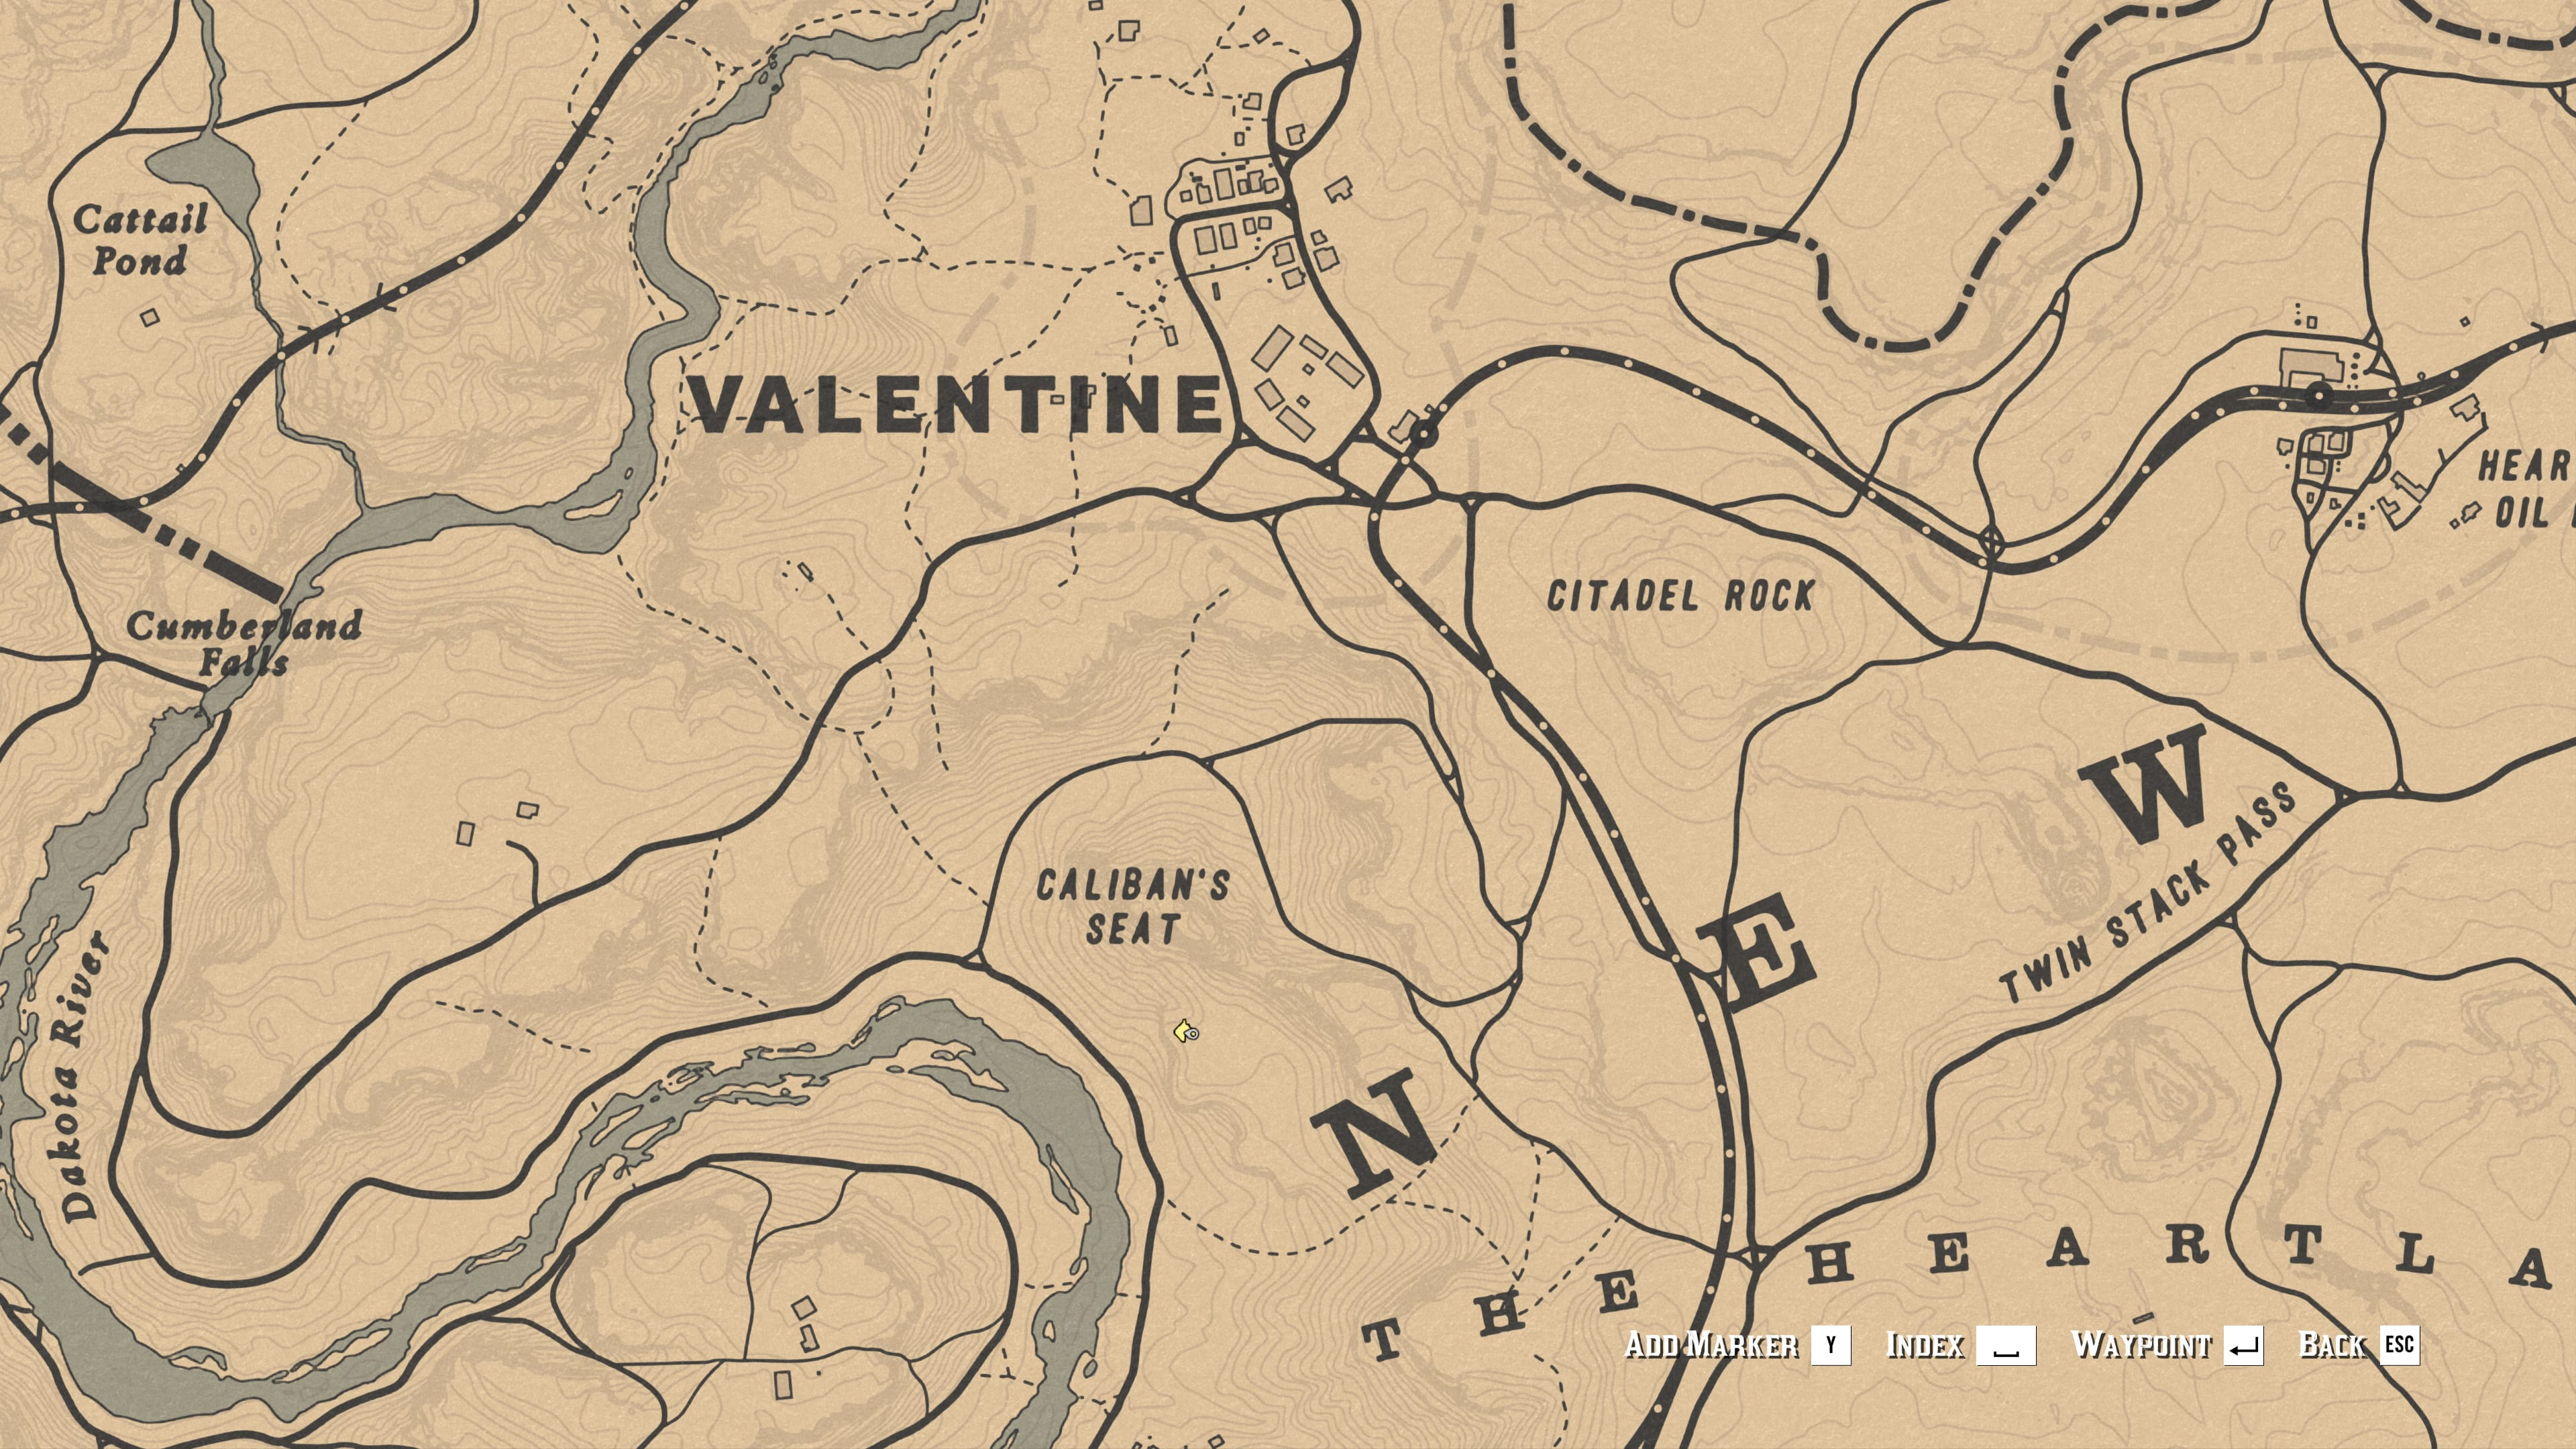 In Red Dead Redemption II's map the player icon is so small you might miss it at first glance